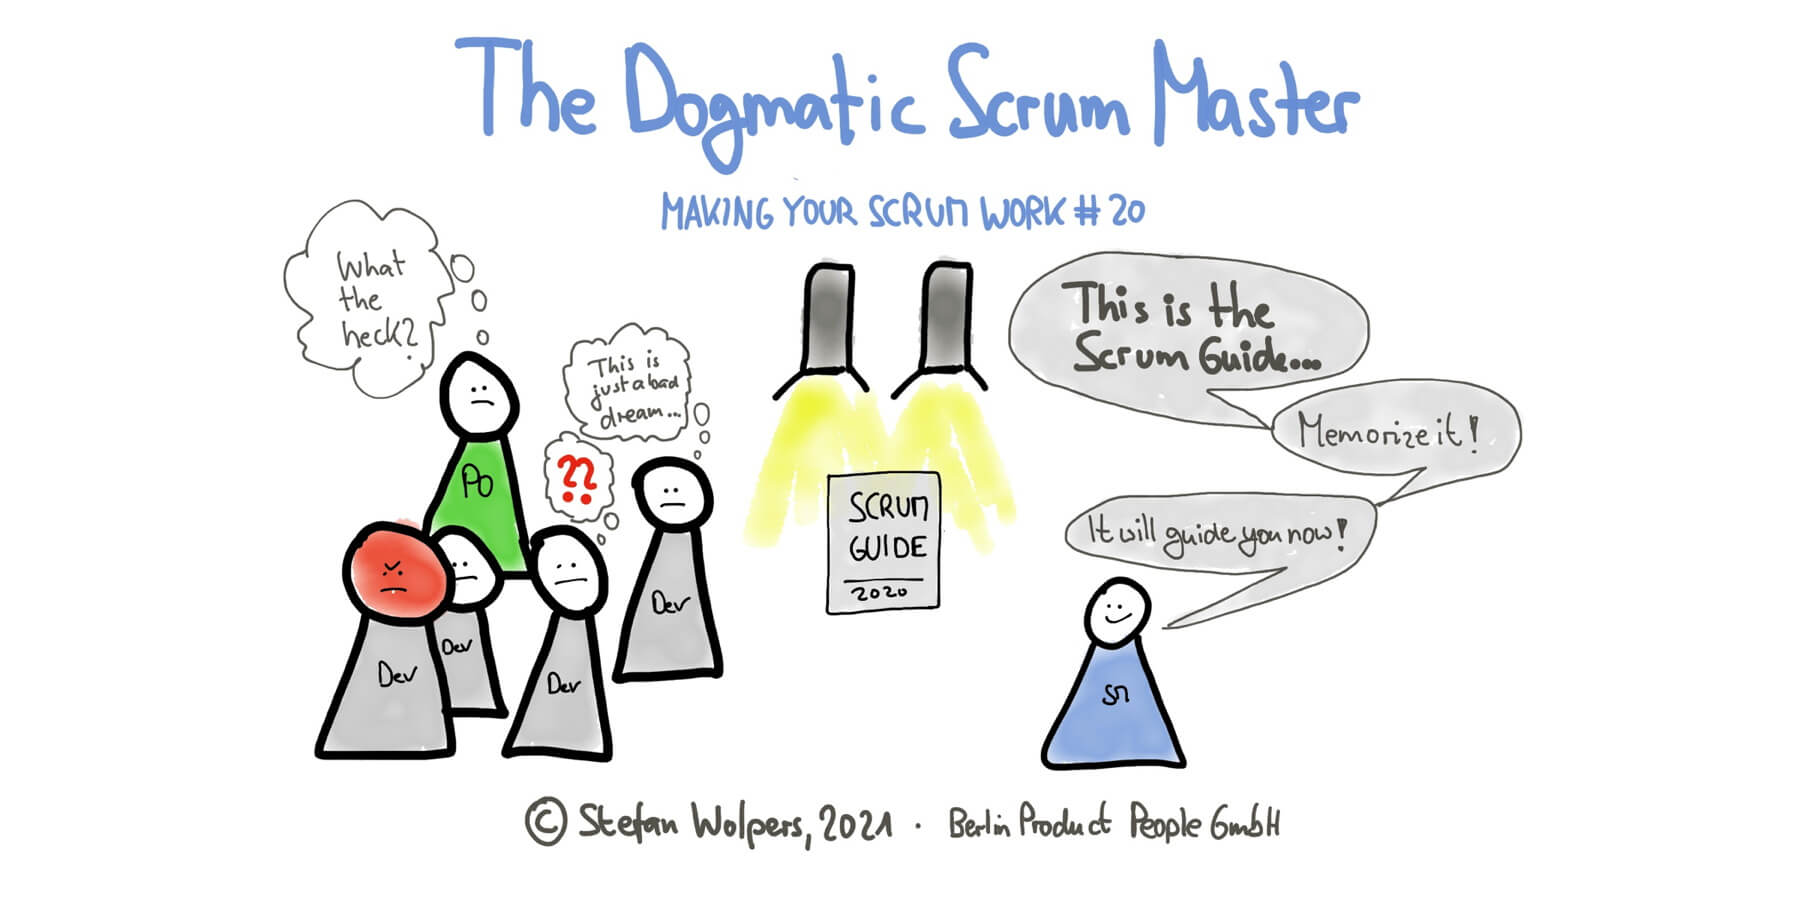 The Dogmatic Scrum Master Anti-Pattern — Making Your Scrum Work #20 — Berlin Product People GmbH